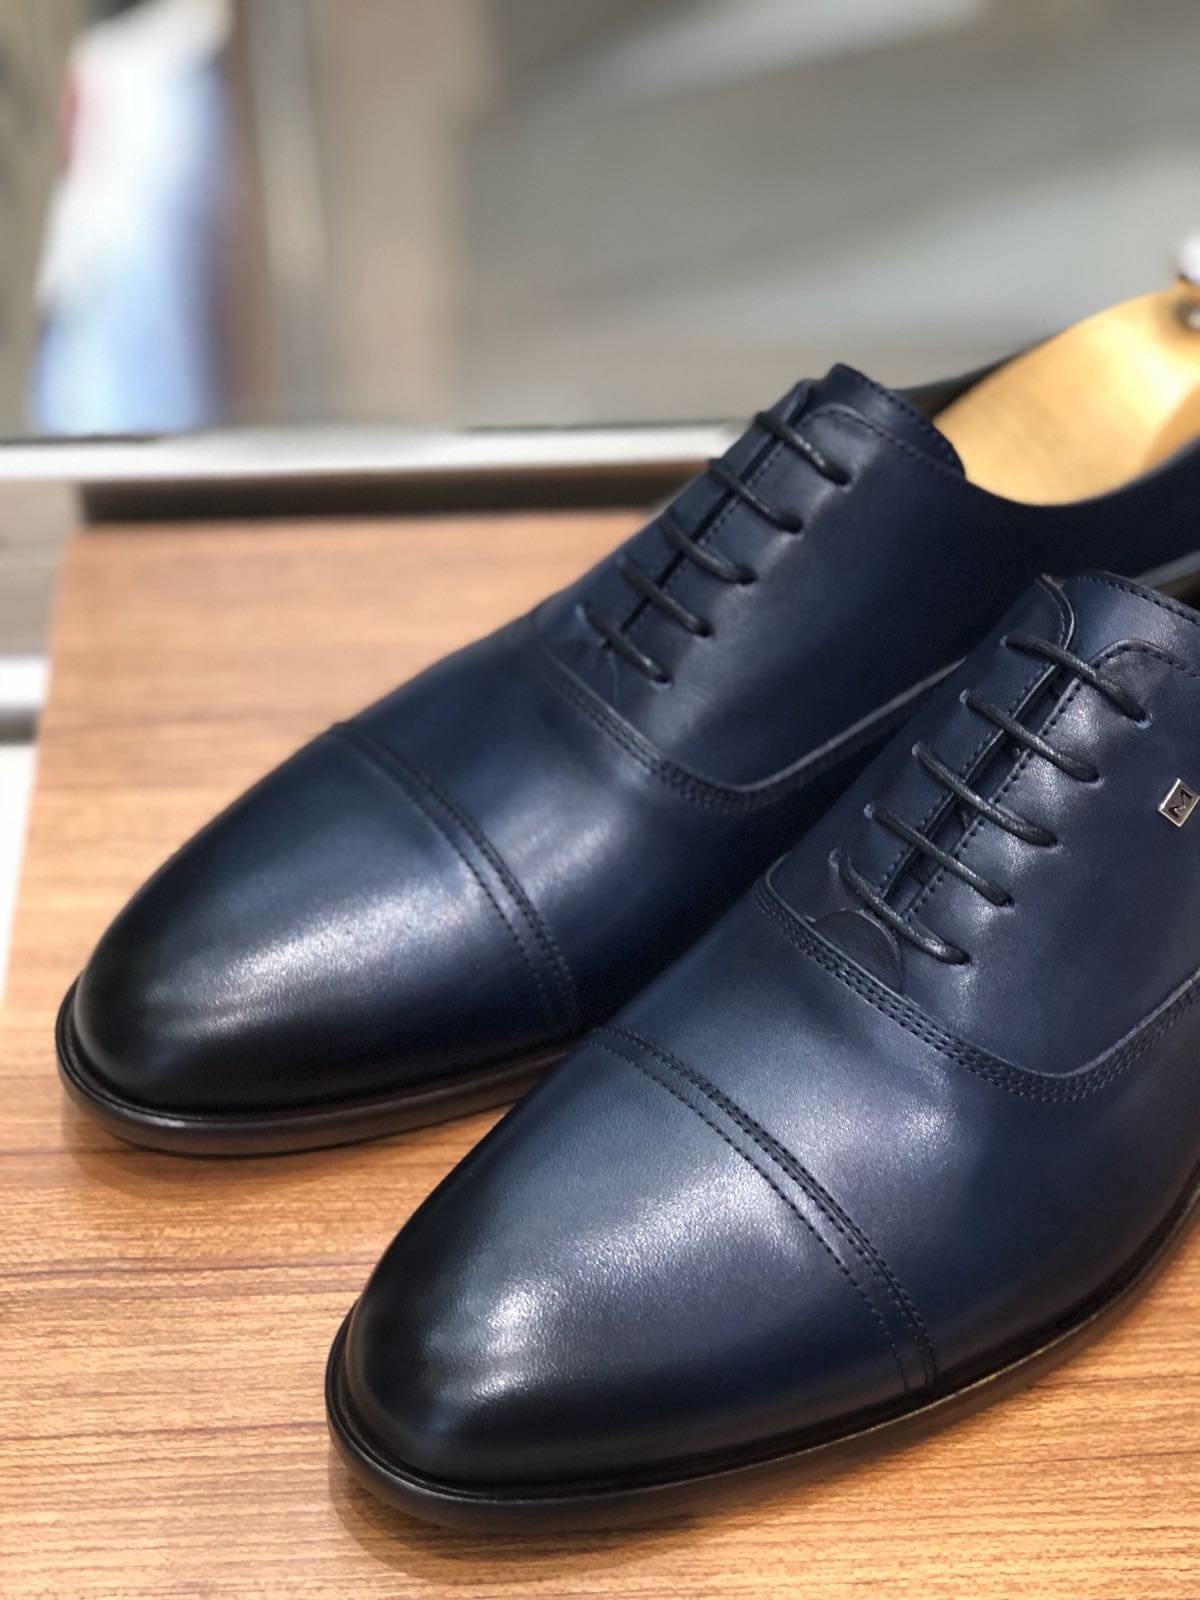 Buy Black Patent Leather Oxfords by GentWith.com with Free Shipping  Patent  leather oxfords, Black patent leather oxfords, Mens patent leather shoes